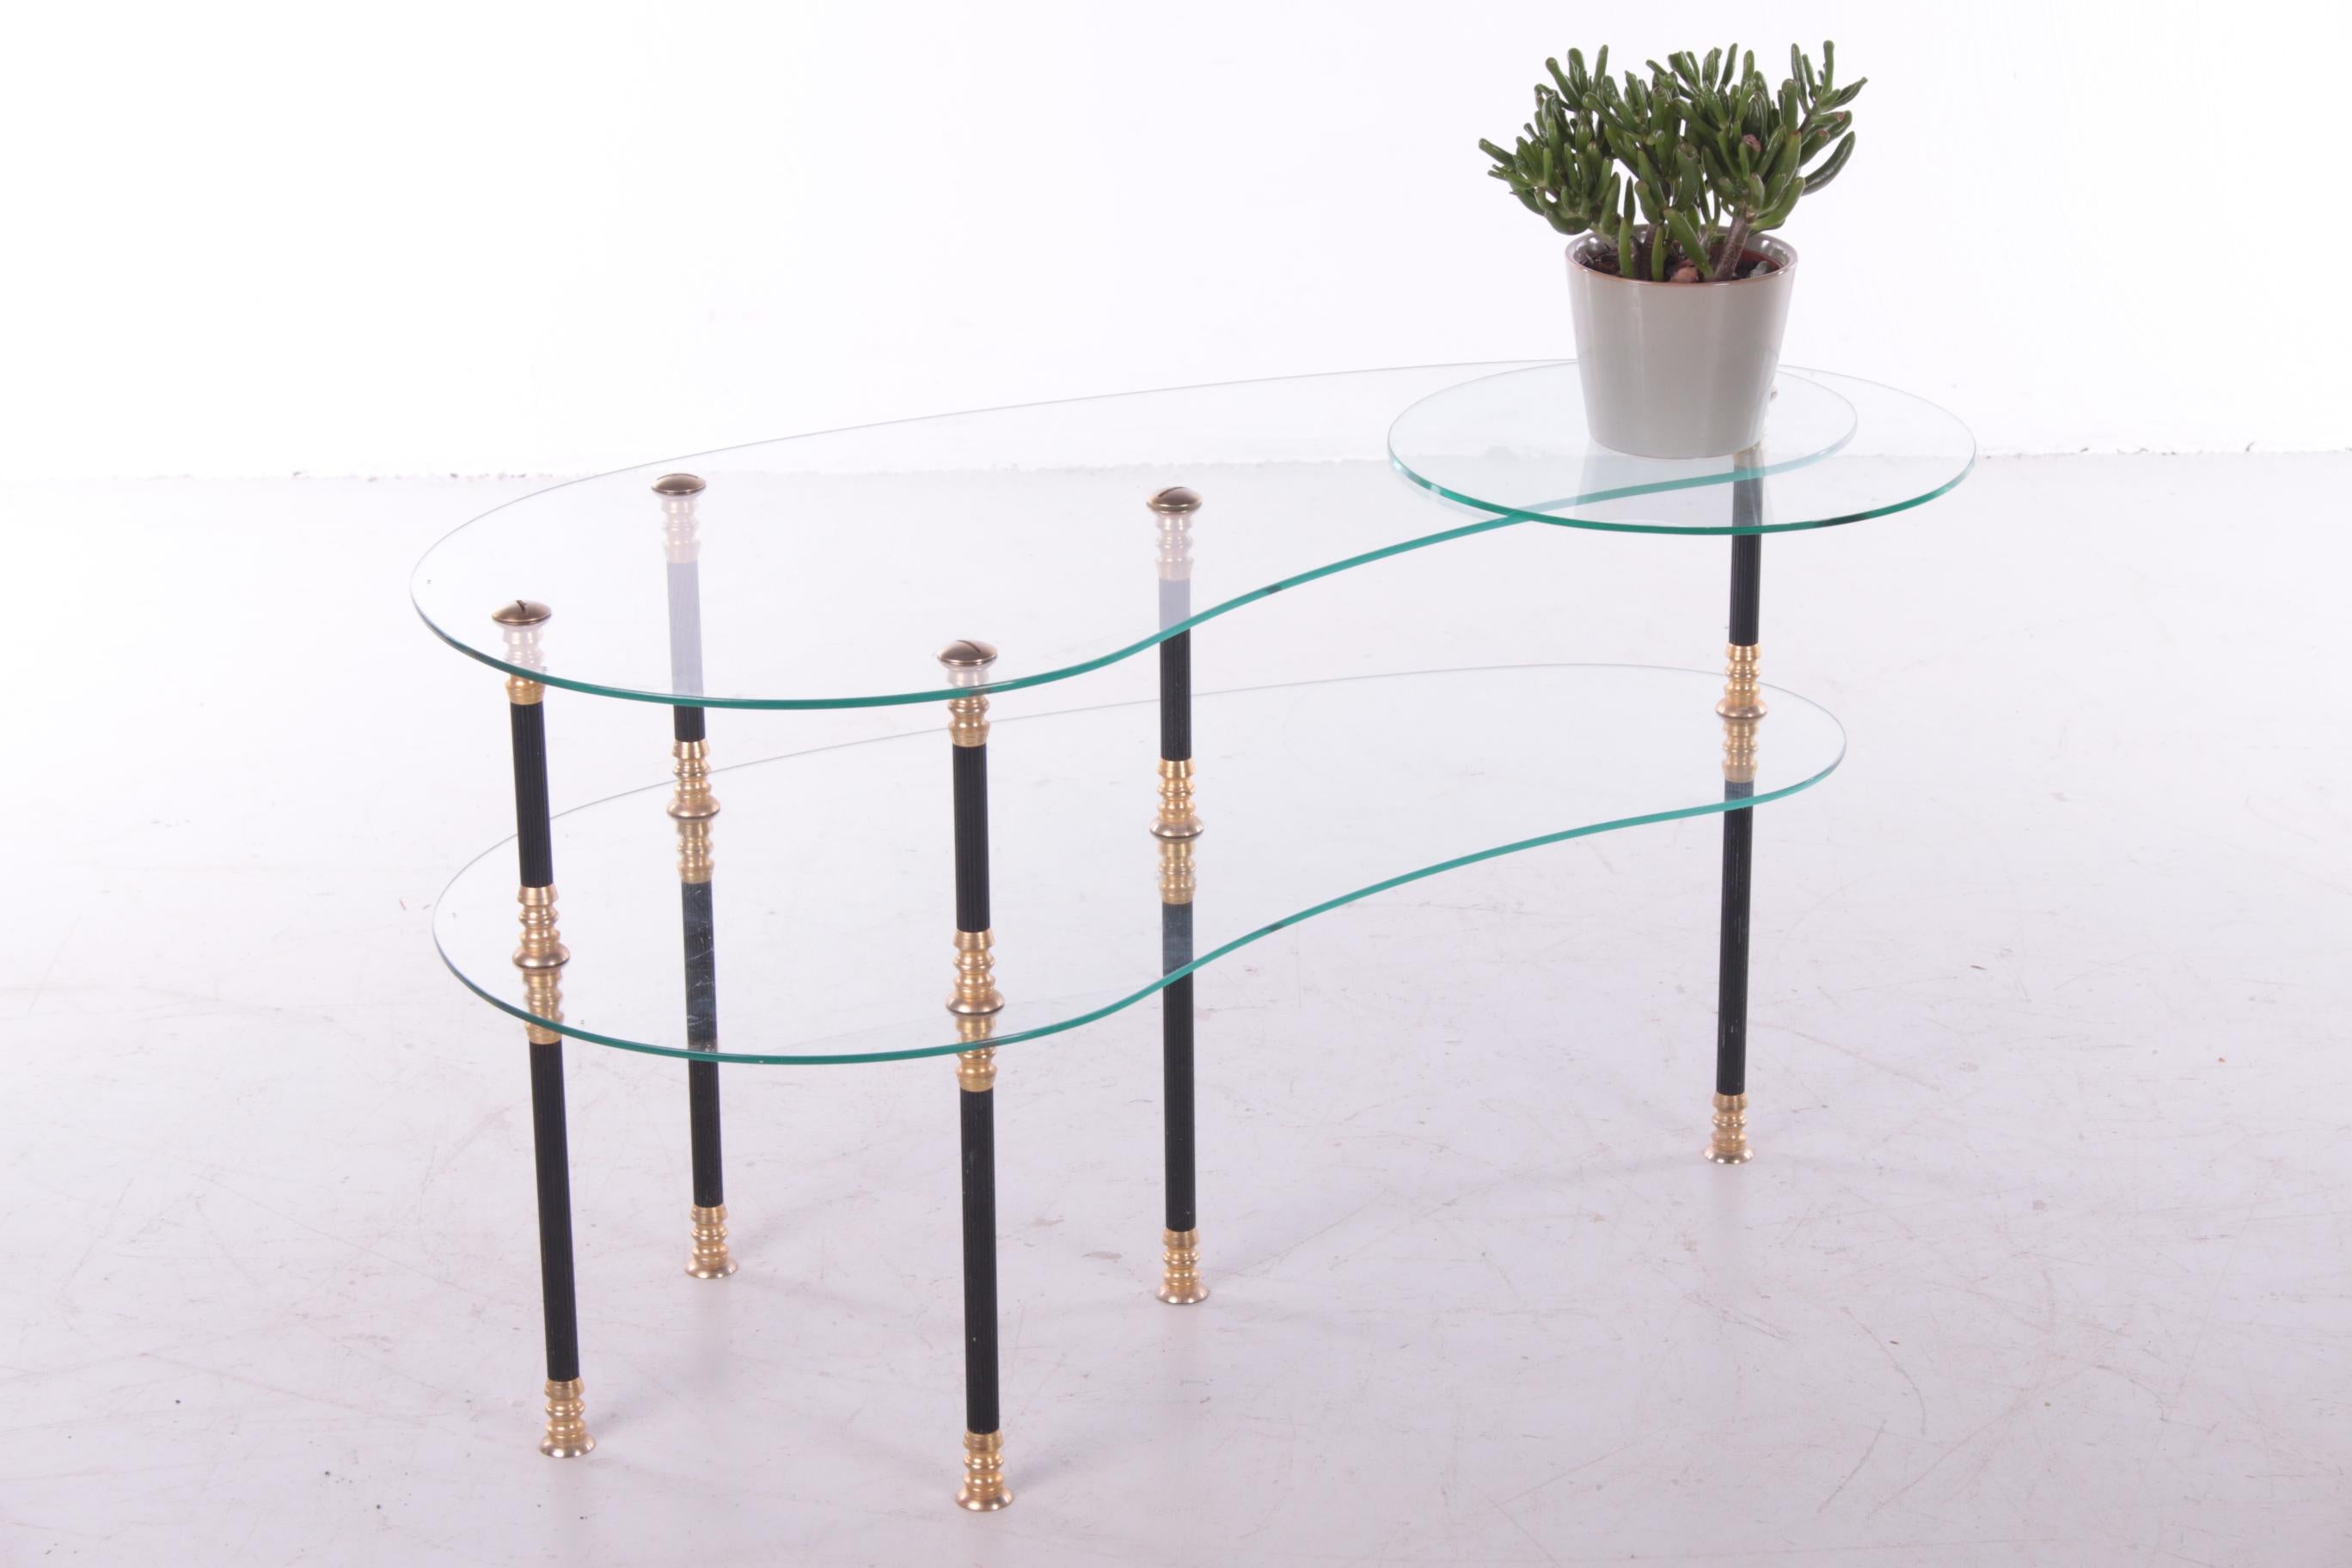 This is a coffee table / side table with 2 layers of glass. The table can be completely disassembled for easy transport and installation.

This table also has an extra glass plate that you can adjust so that it sits exactly to taste. This way you